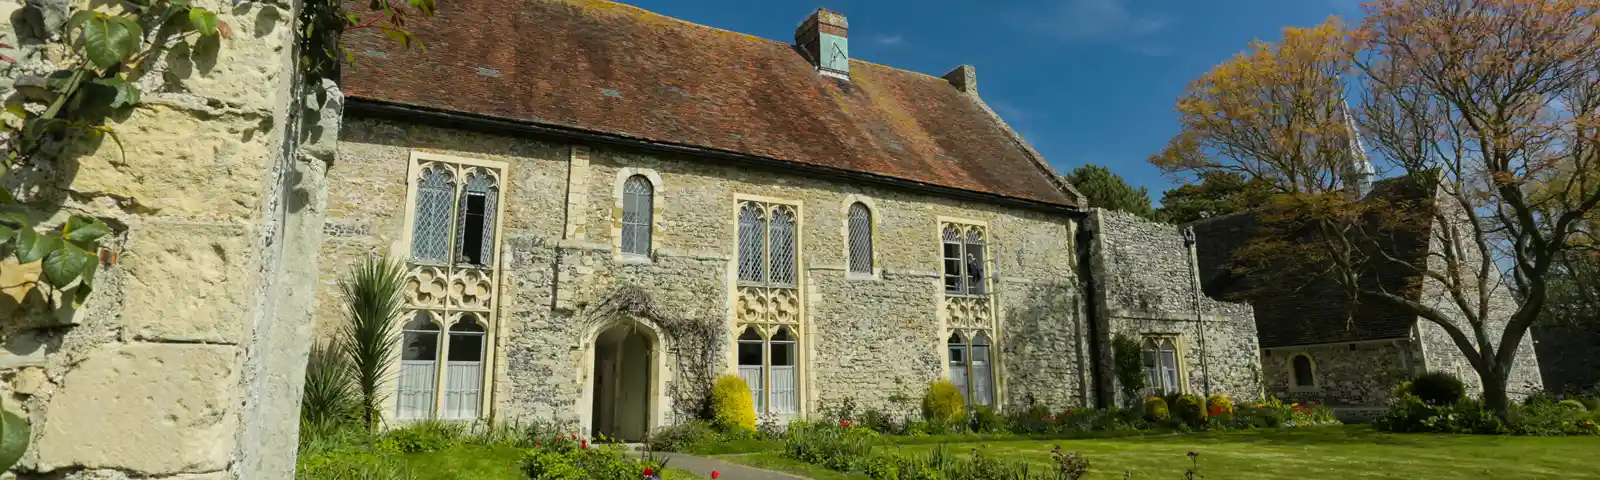 Minster Abbey (Still From Our Film)